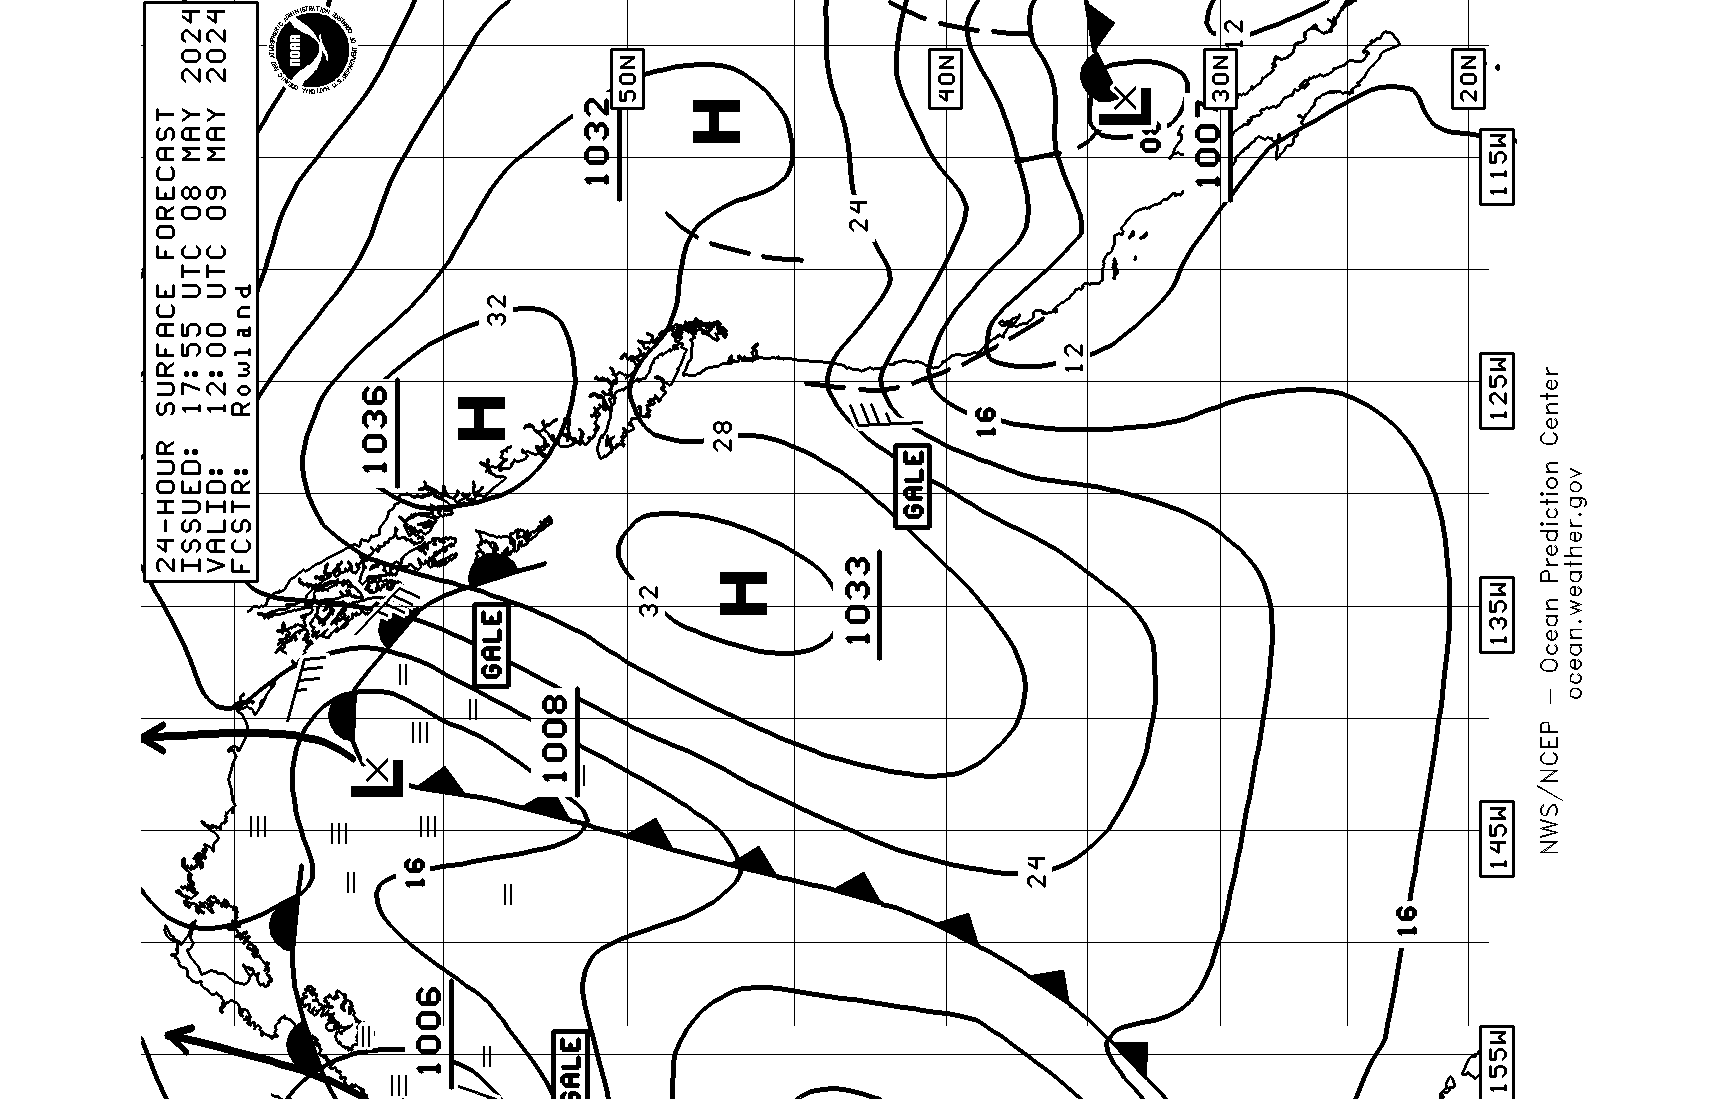 24 hour Pacific surface offshore & adjacent waters